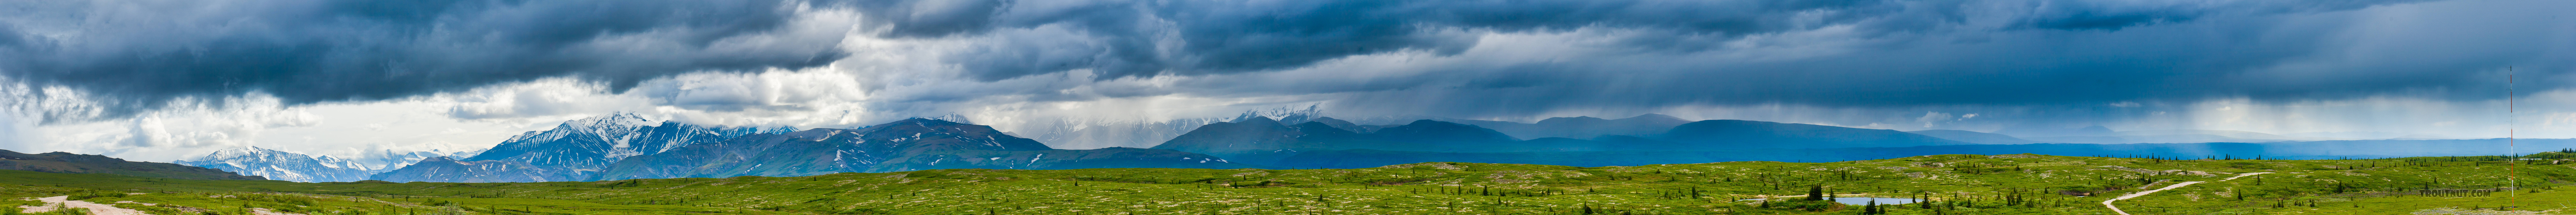 This panorama of the Alaska Range from a high point on Coal Mine Road gives you a taste of the vastness of the landscape.  Of course, it has to be viewed full-size. From Coal Mine Road in Alaska.